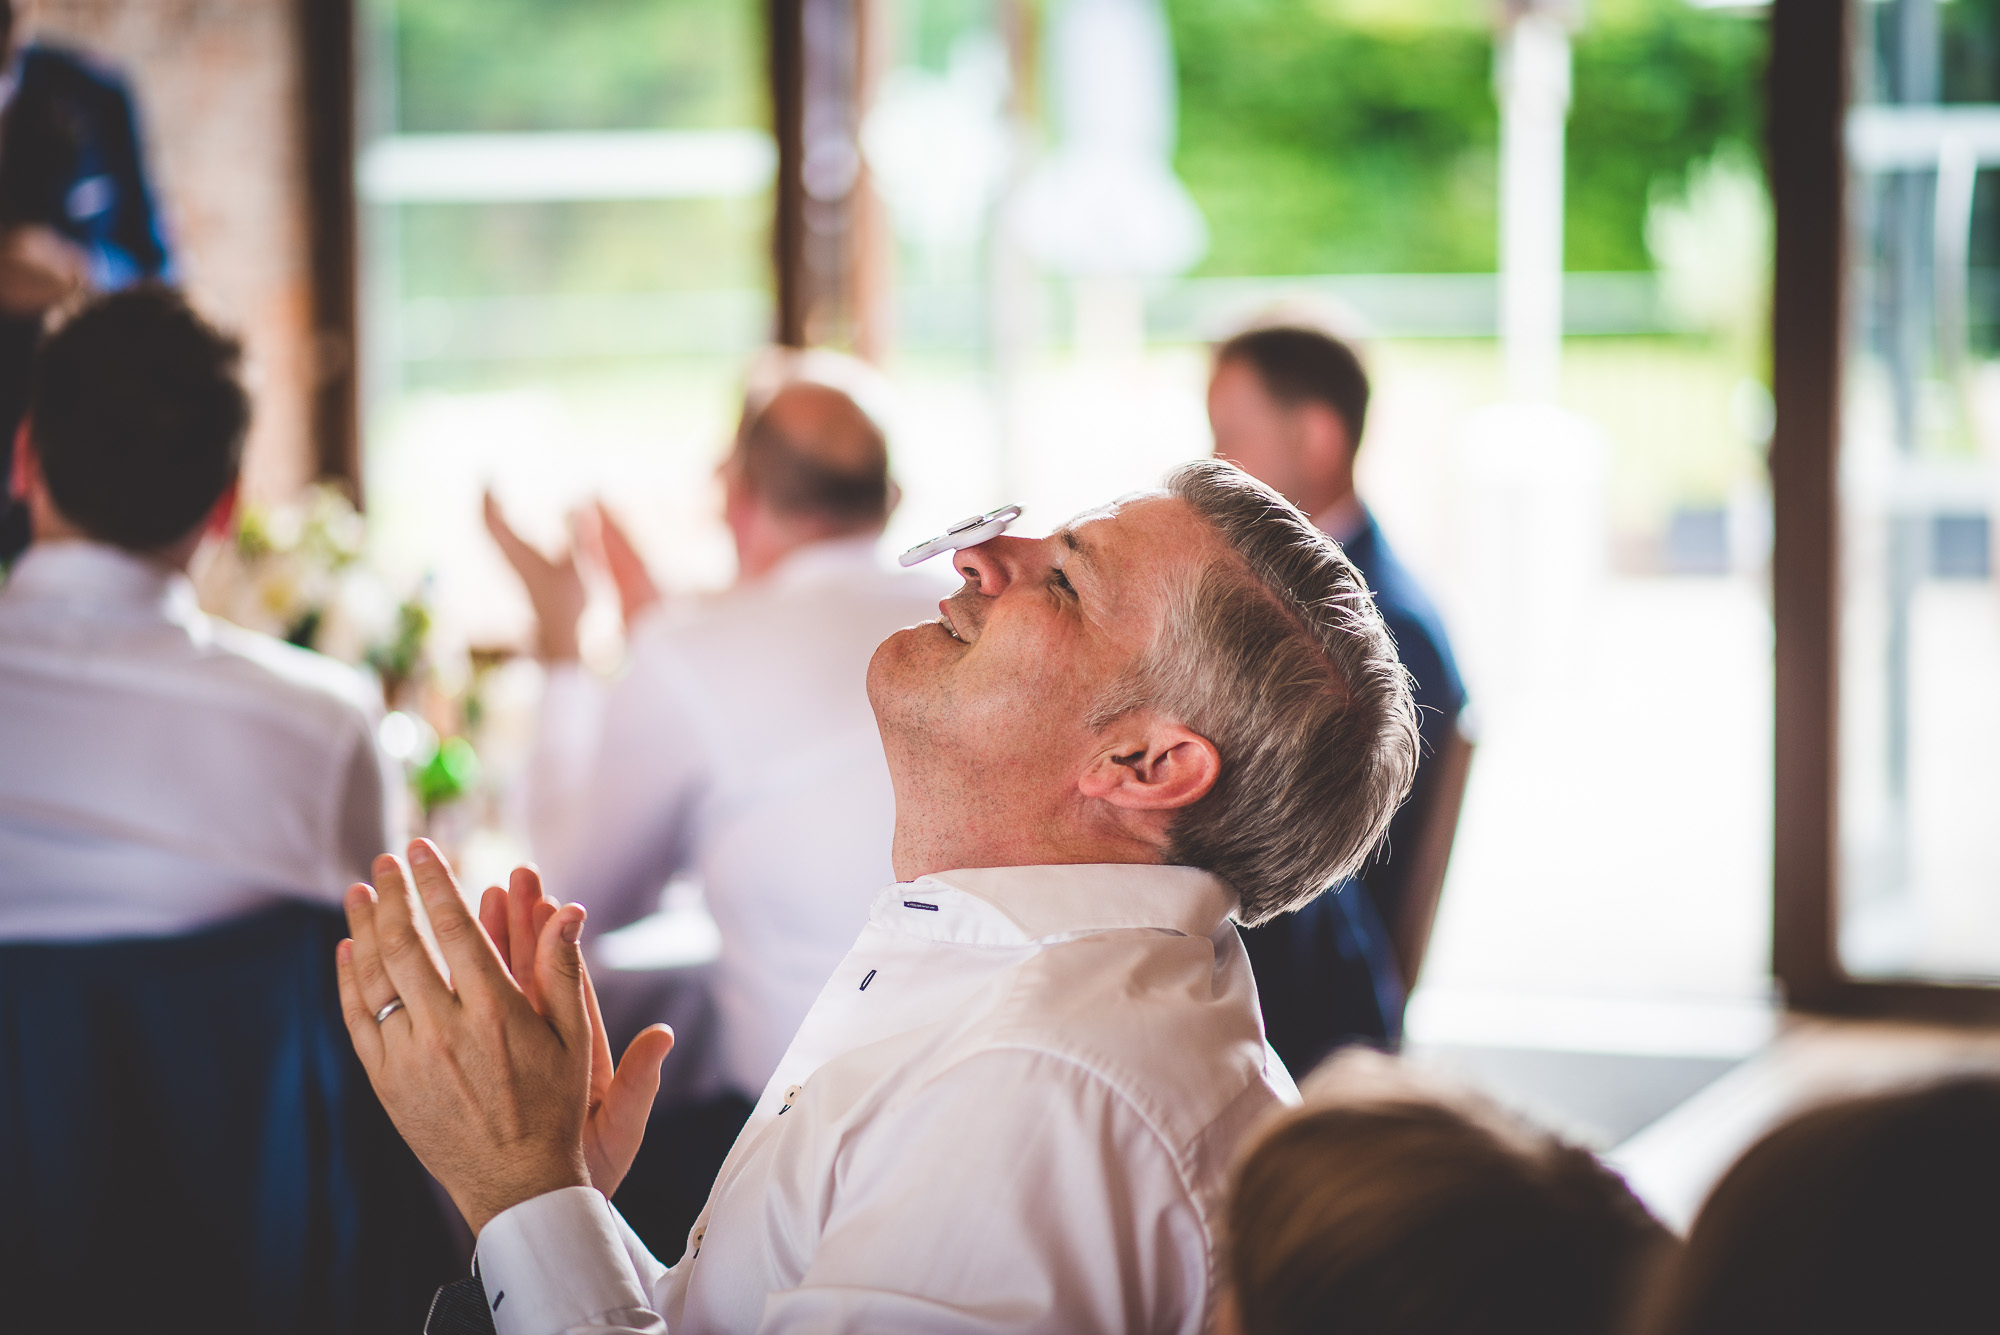 A bride's wedding photo with a man clapping at the reception.